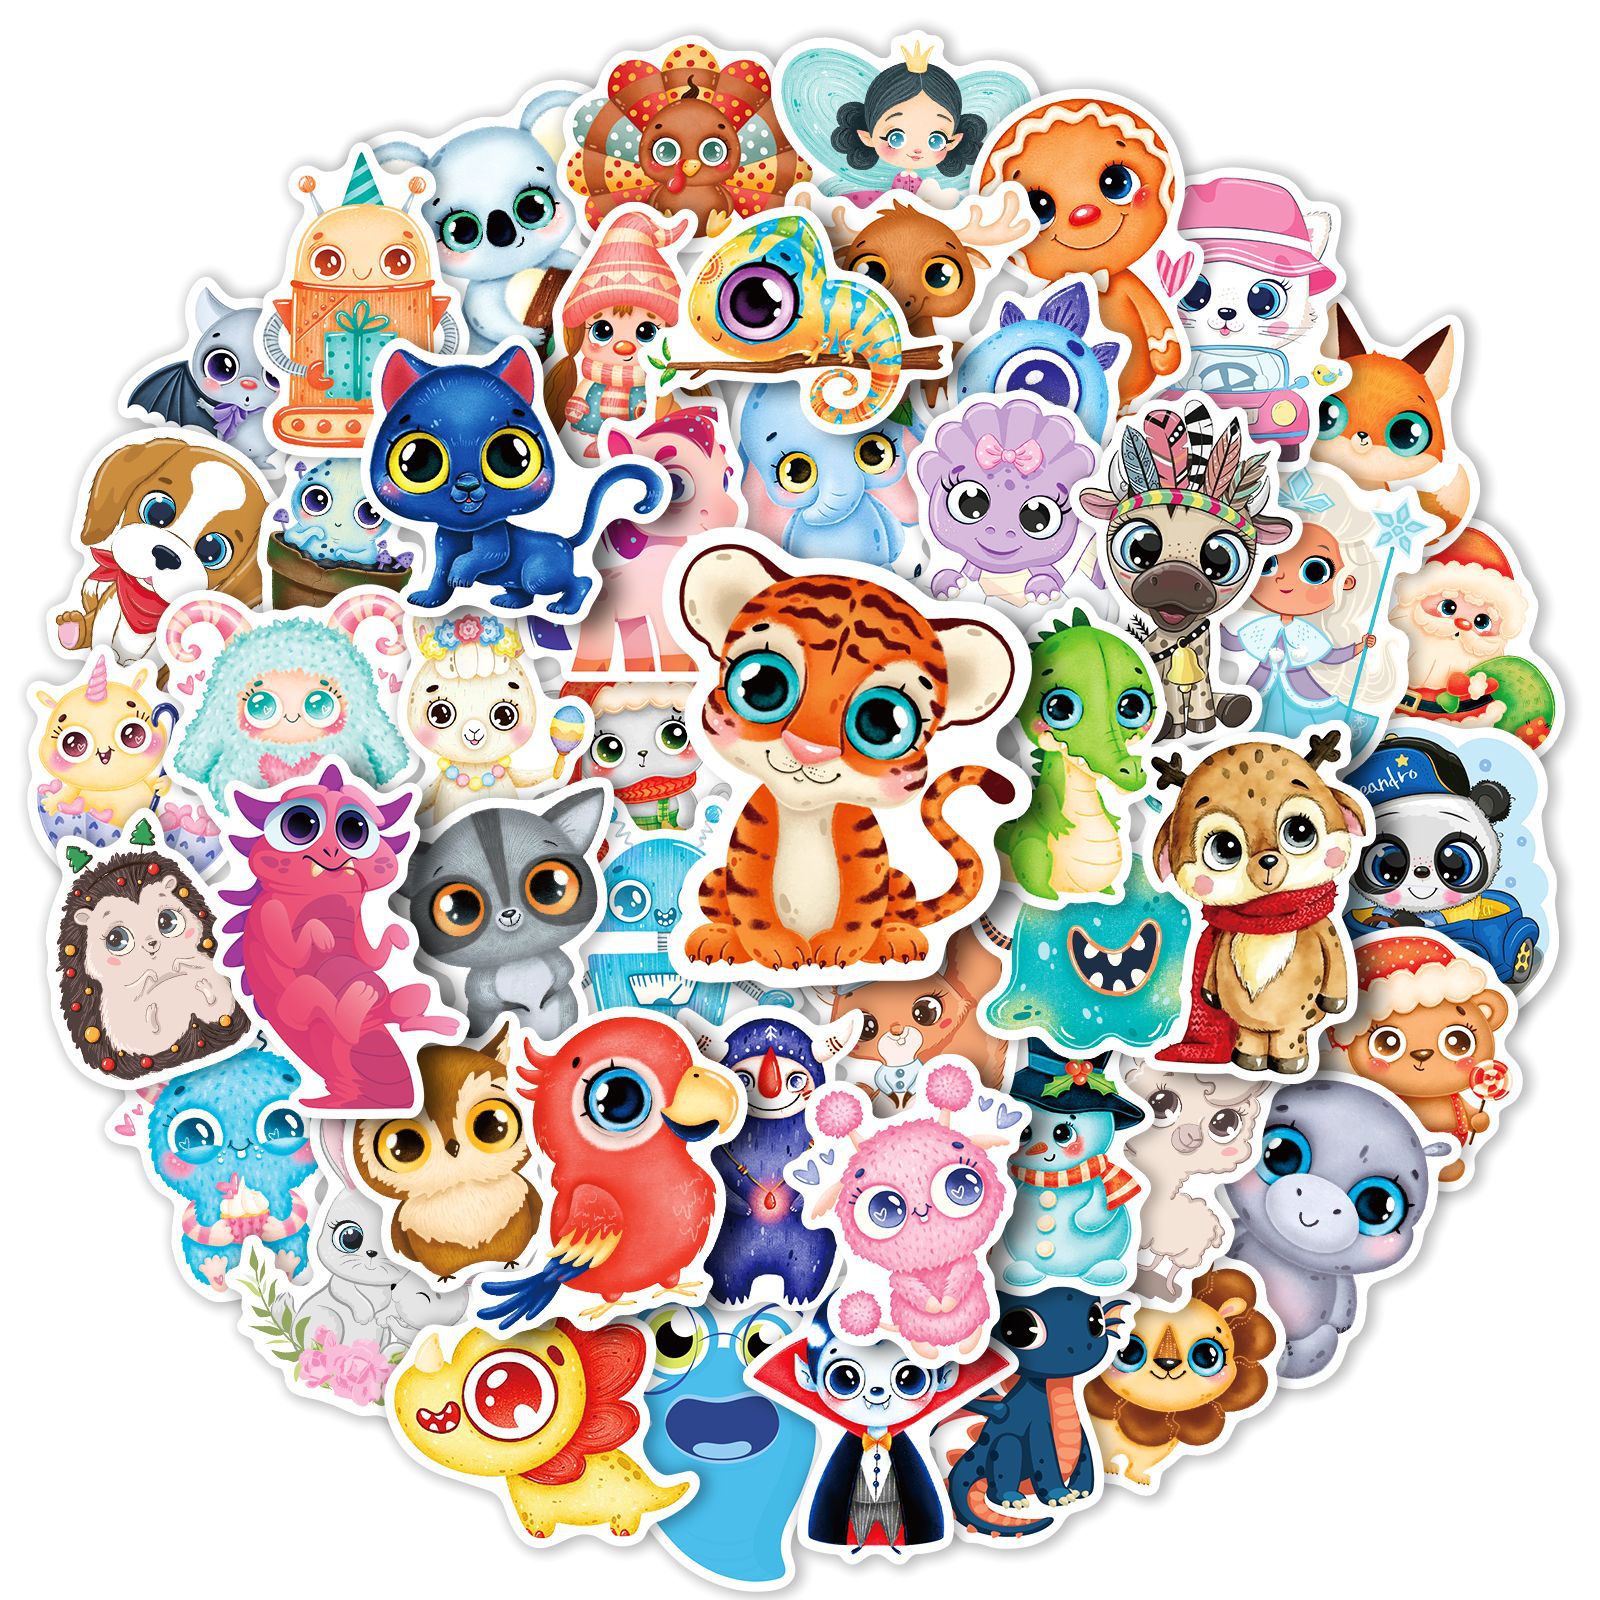 Charming Big-Eyed Animals Sticker Set for Kids: 50 Cute & Educational